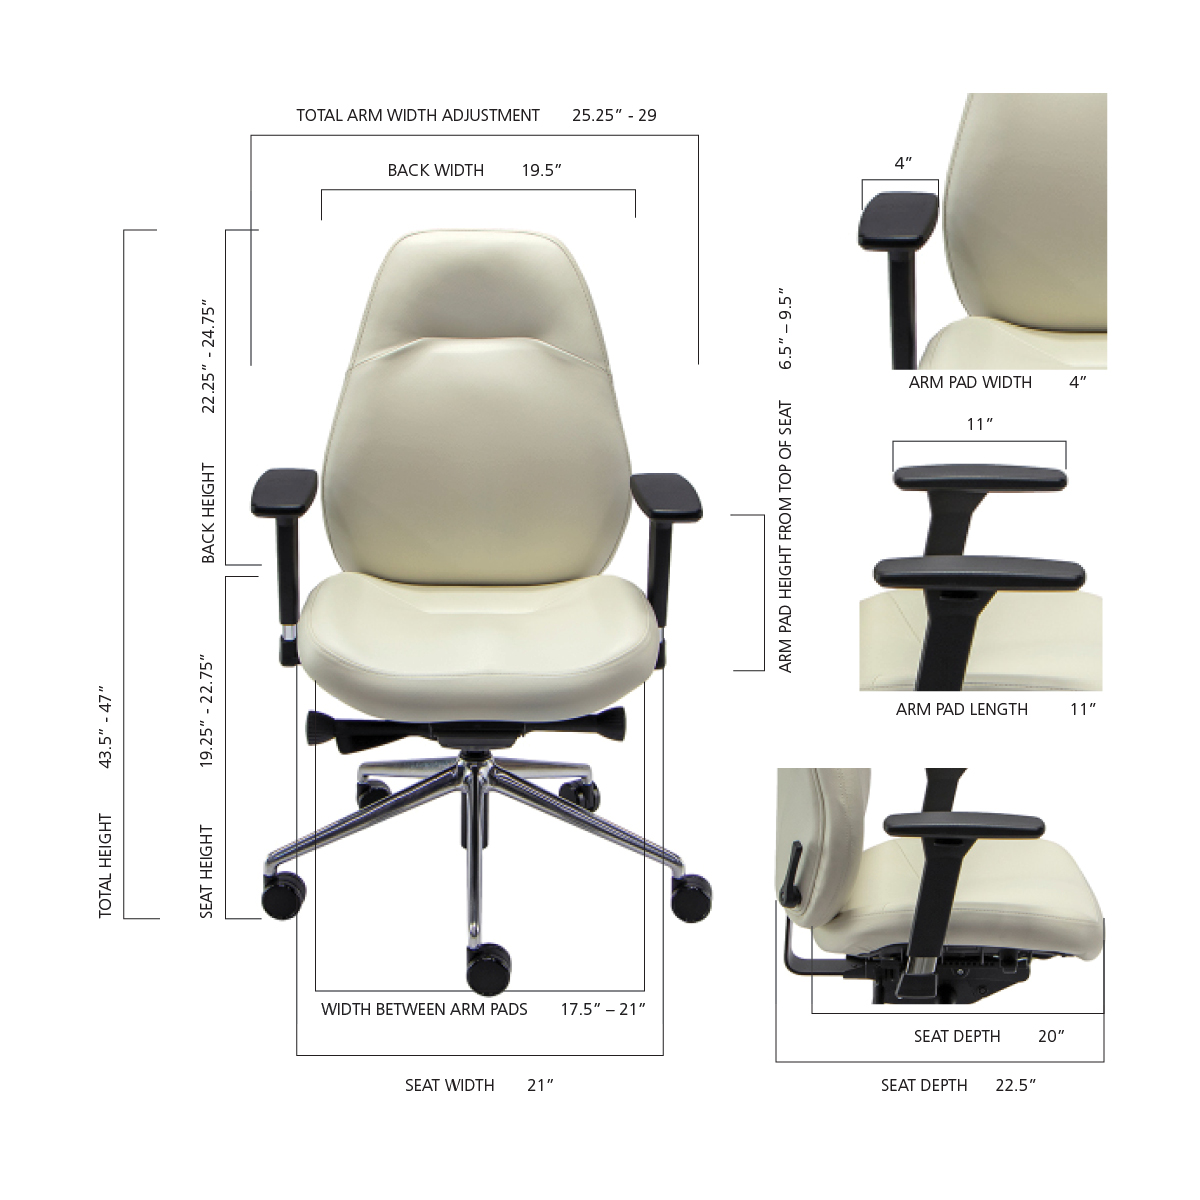 Size Guide for LIFEFORM Chairs